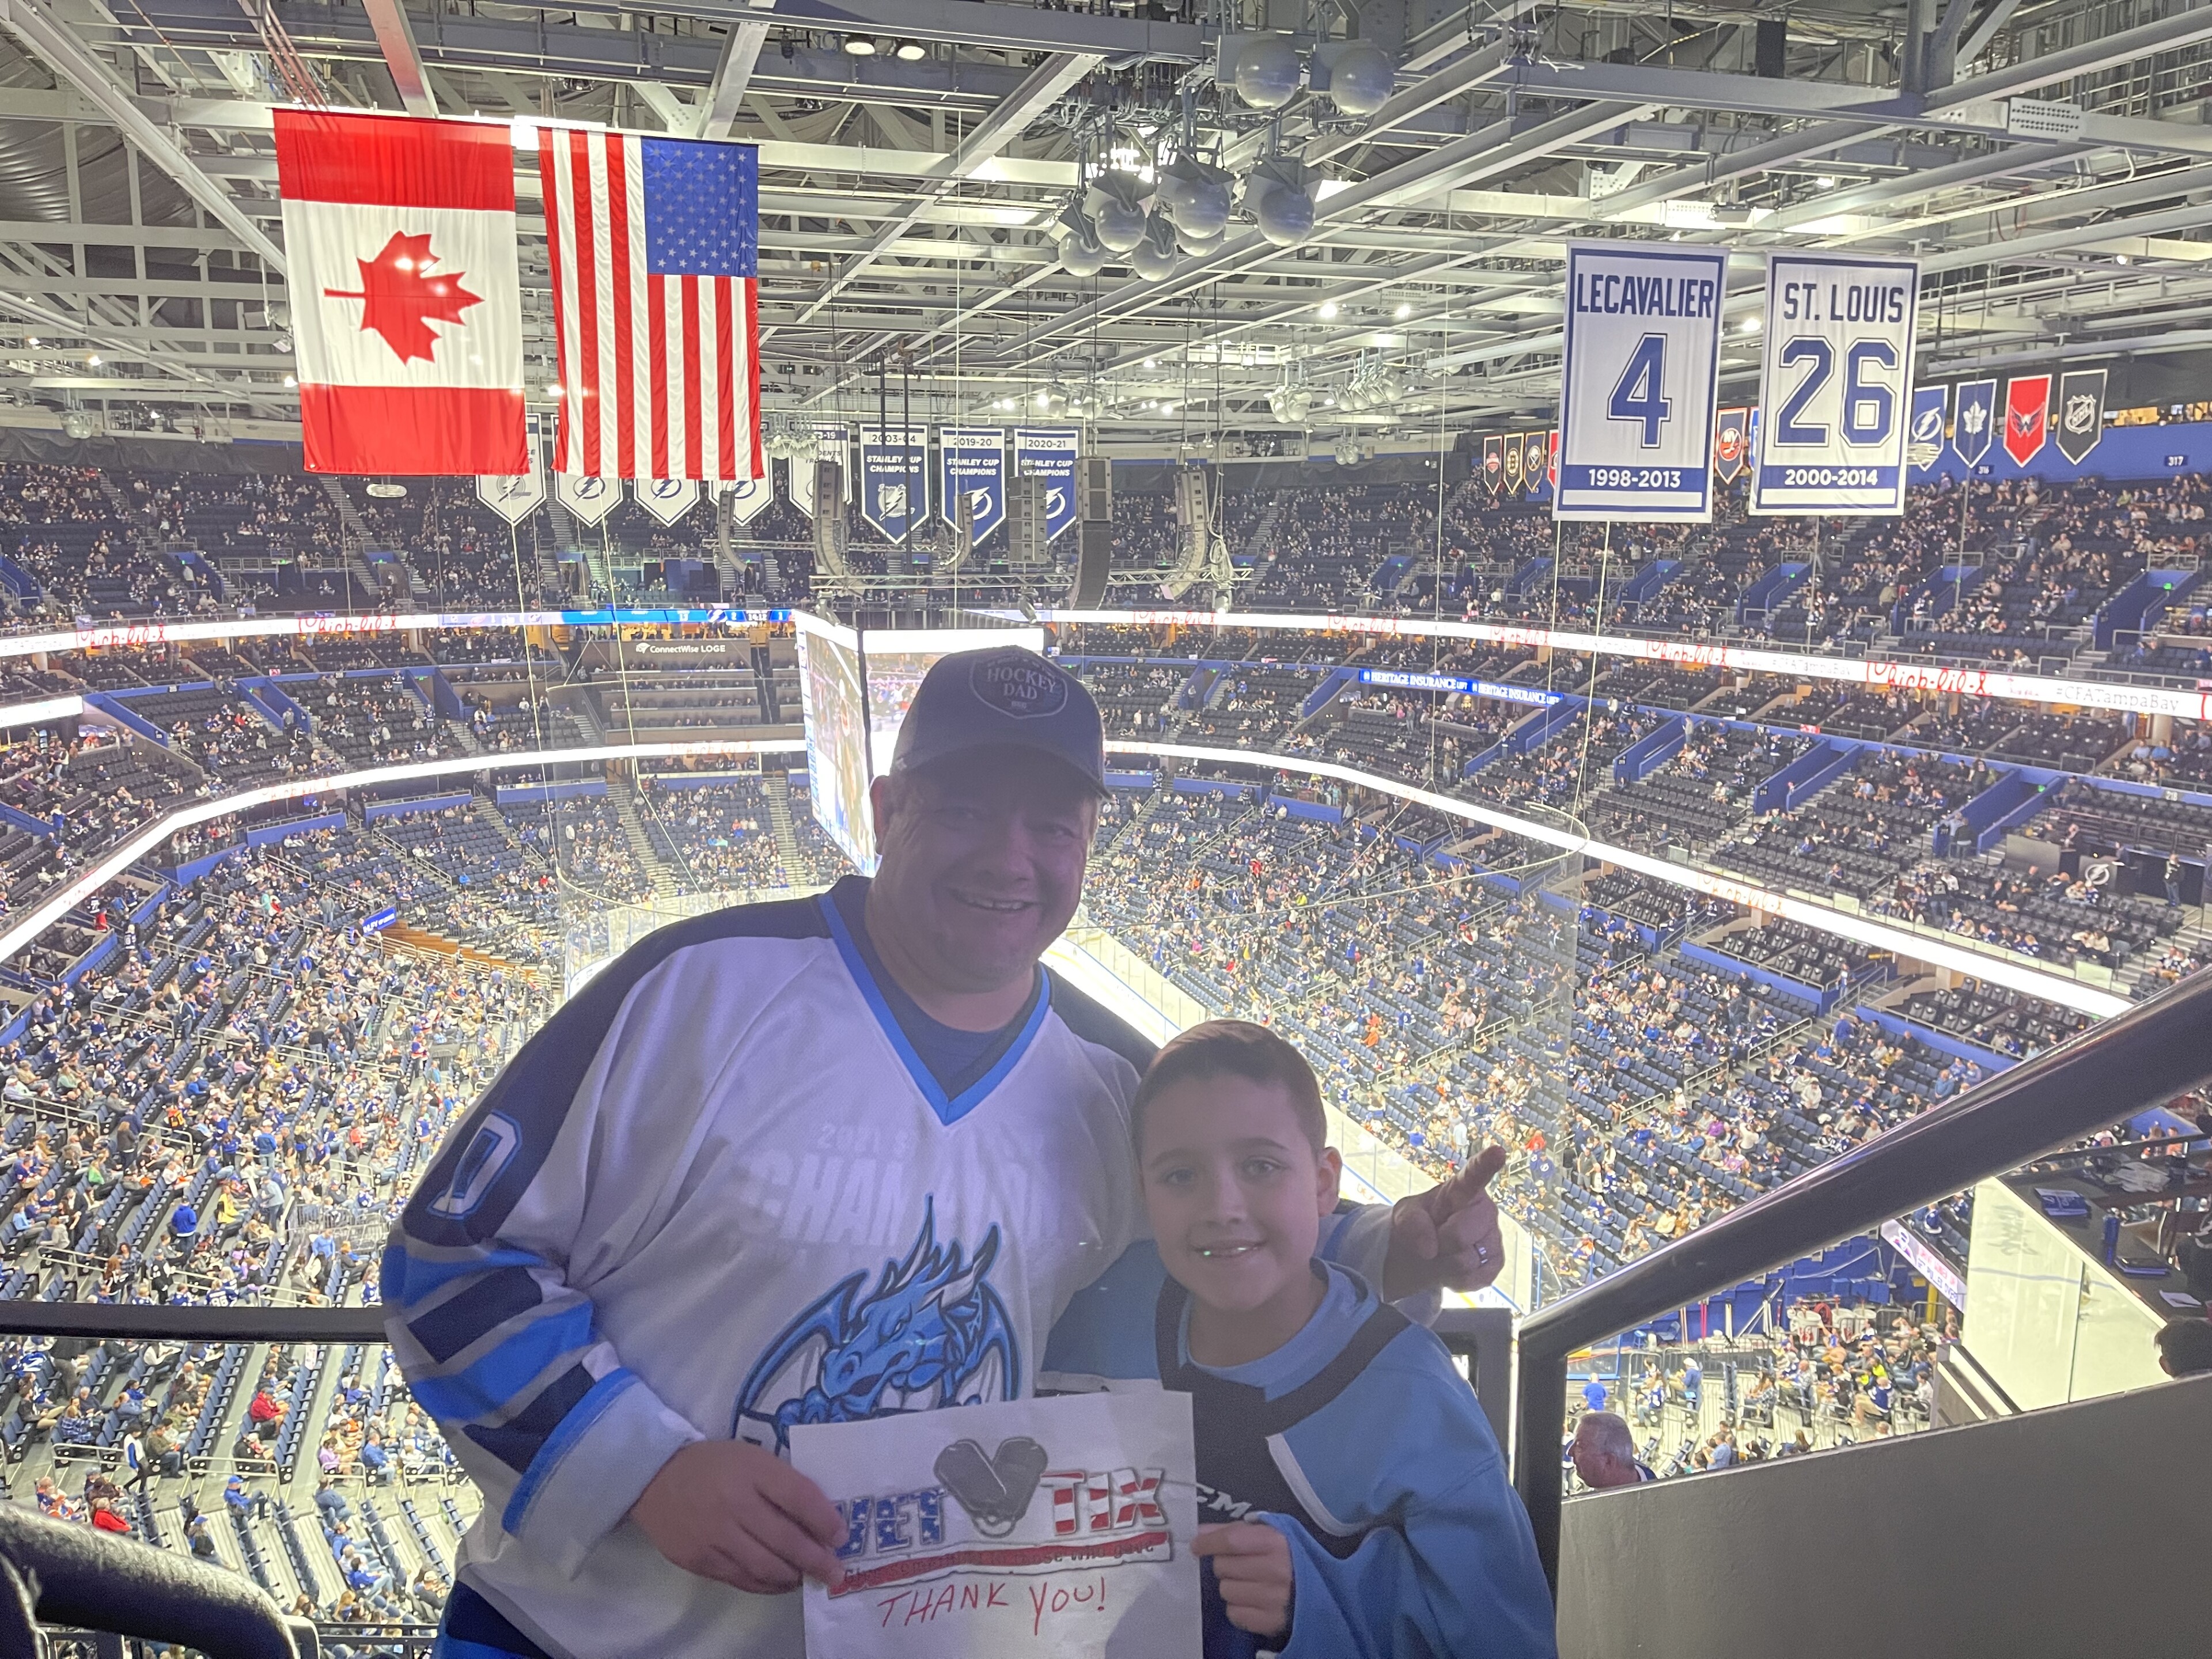 Connectwise Loge at Amalie Arena 